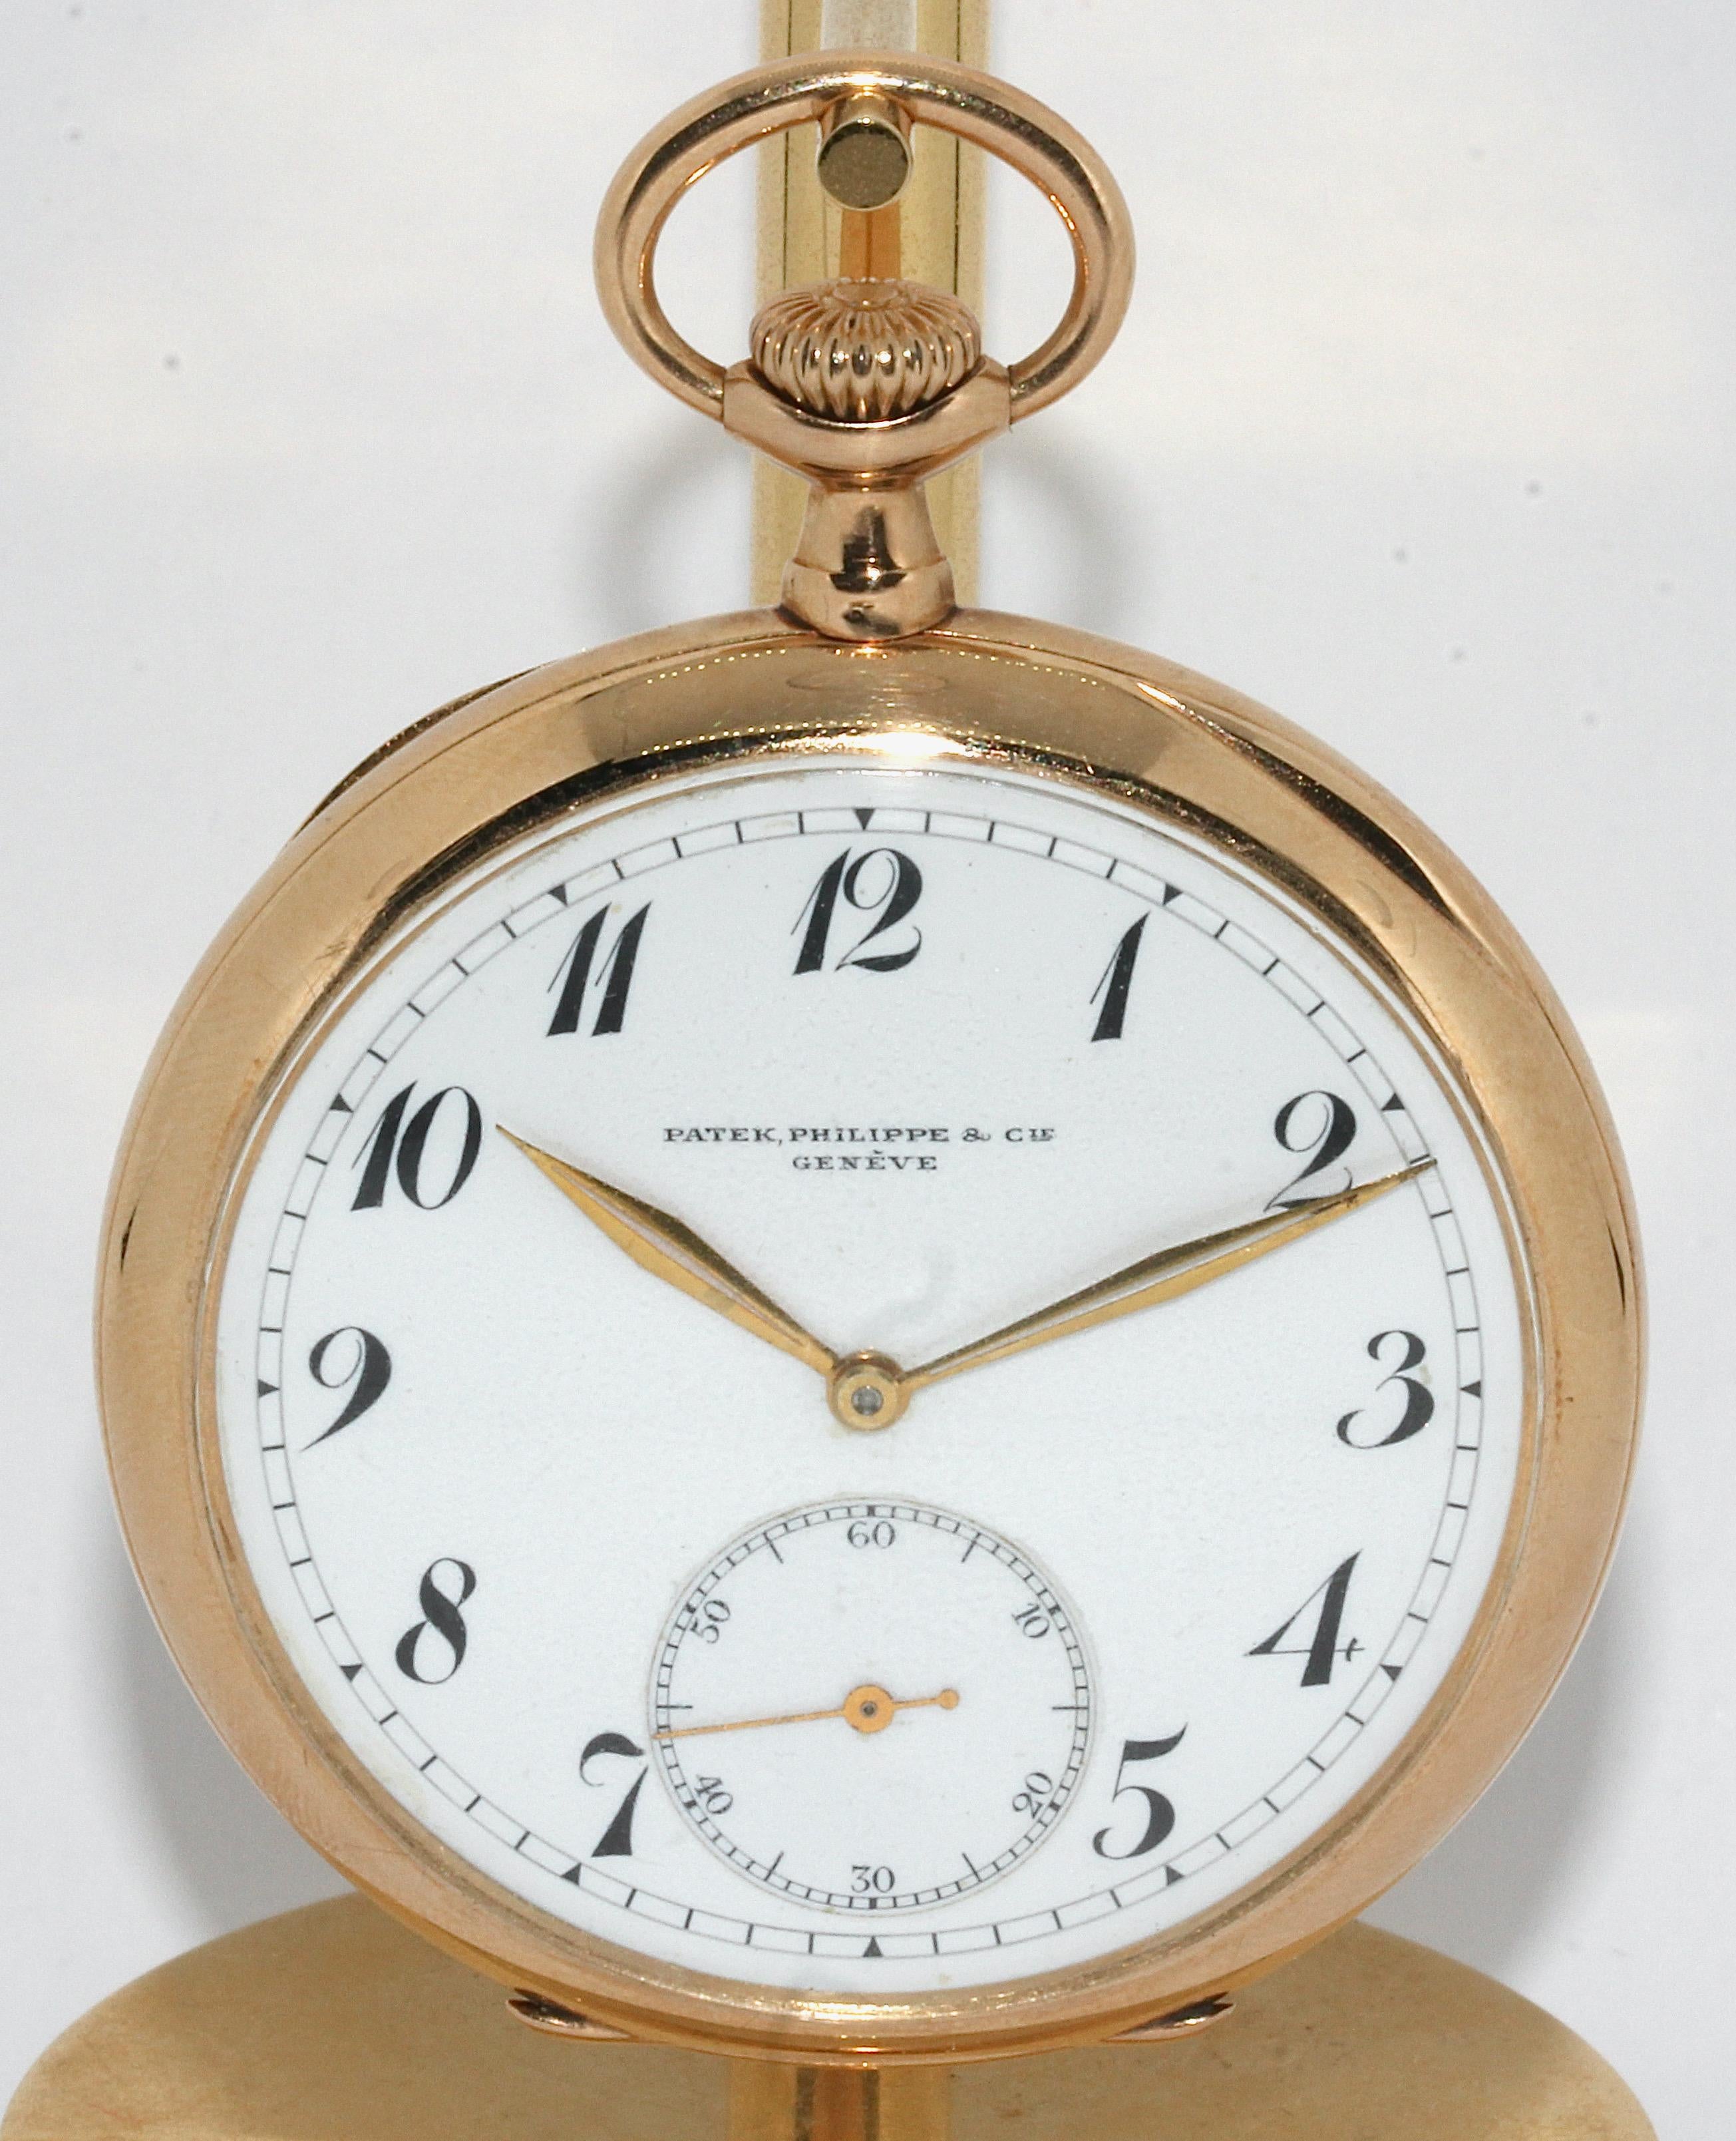 Patek Philippe Gold Pocket Watch, Arabic Enamel Dial

Slight signs of wear due to age on the case.
Hands possibly replaced.

Diameter measured without the crown.
The pocket watch can be wound, the movement works and the hands move.